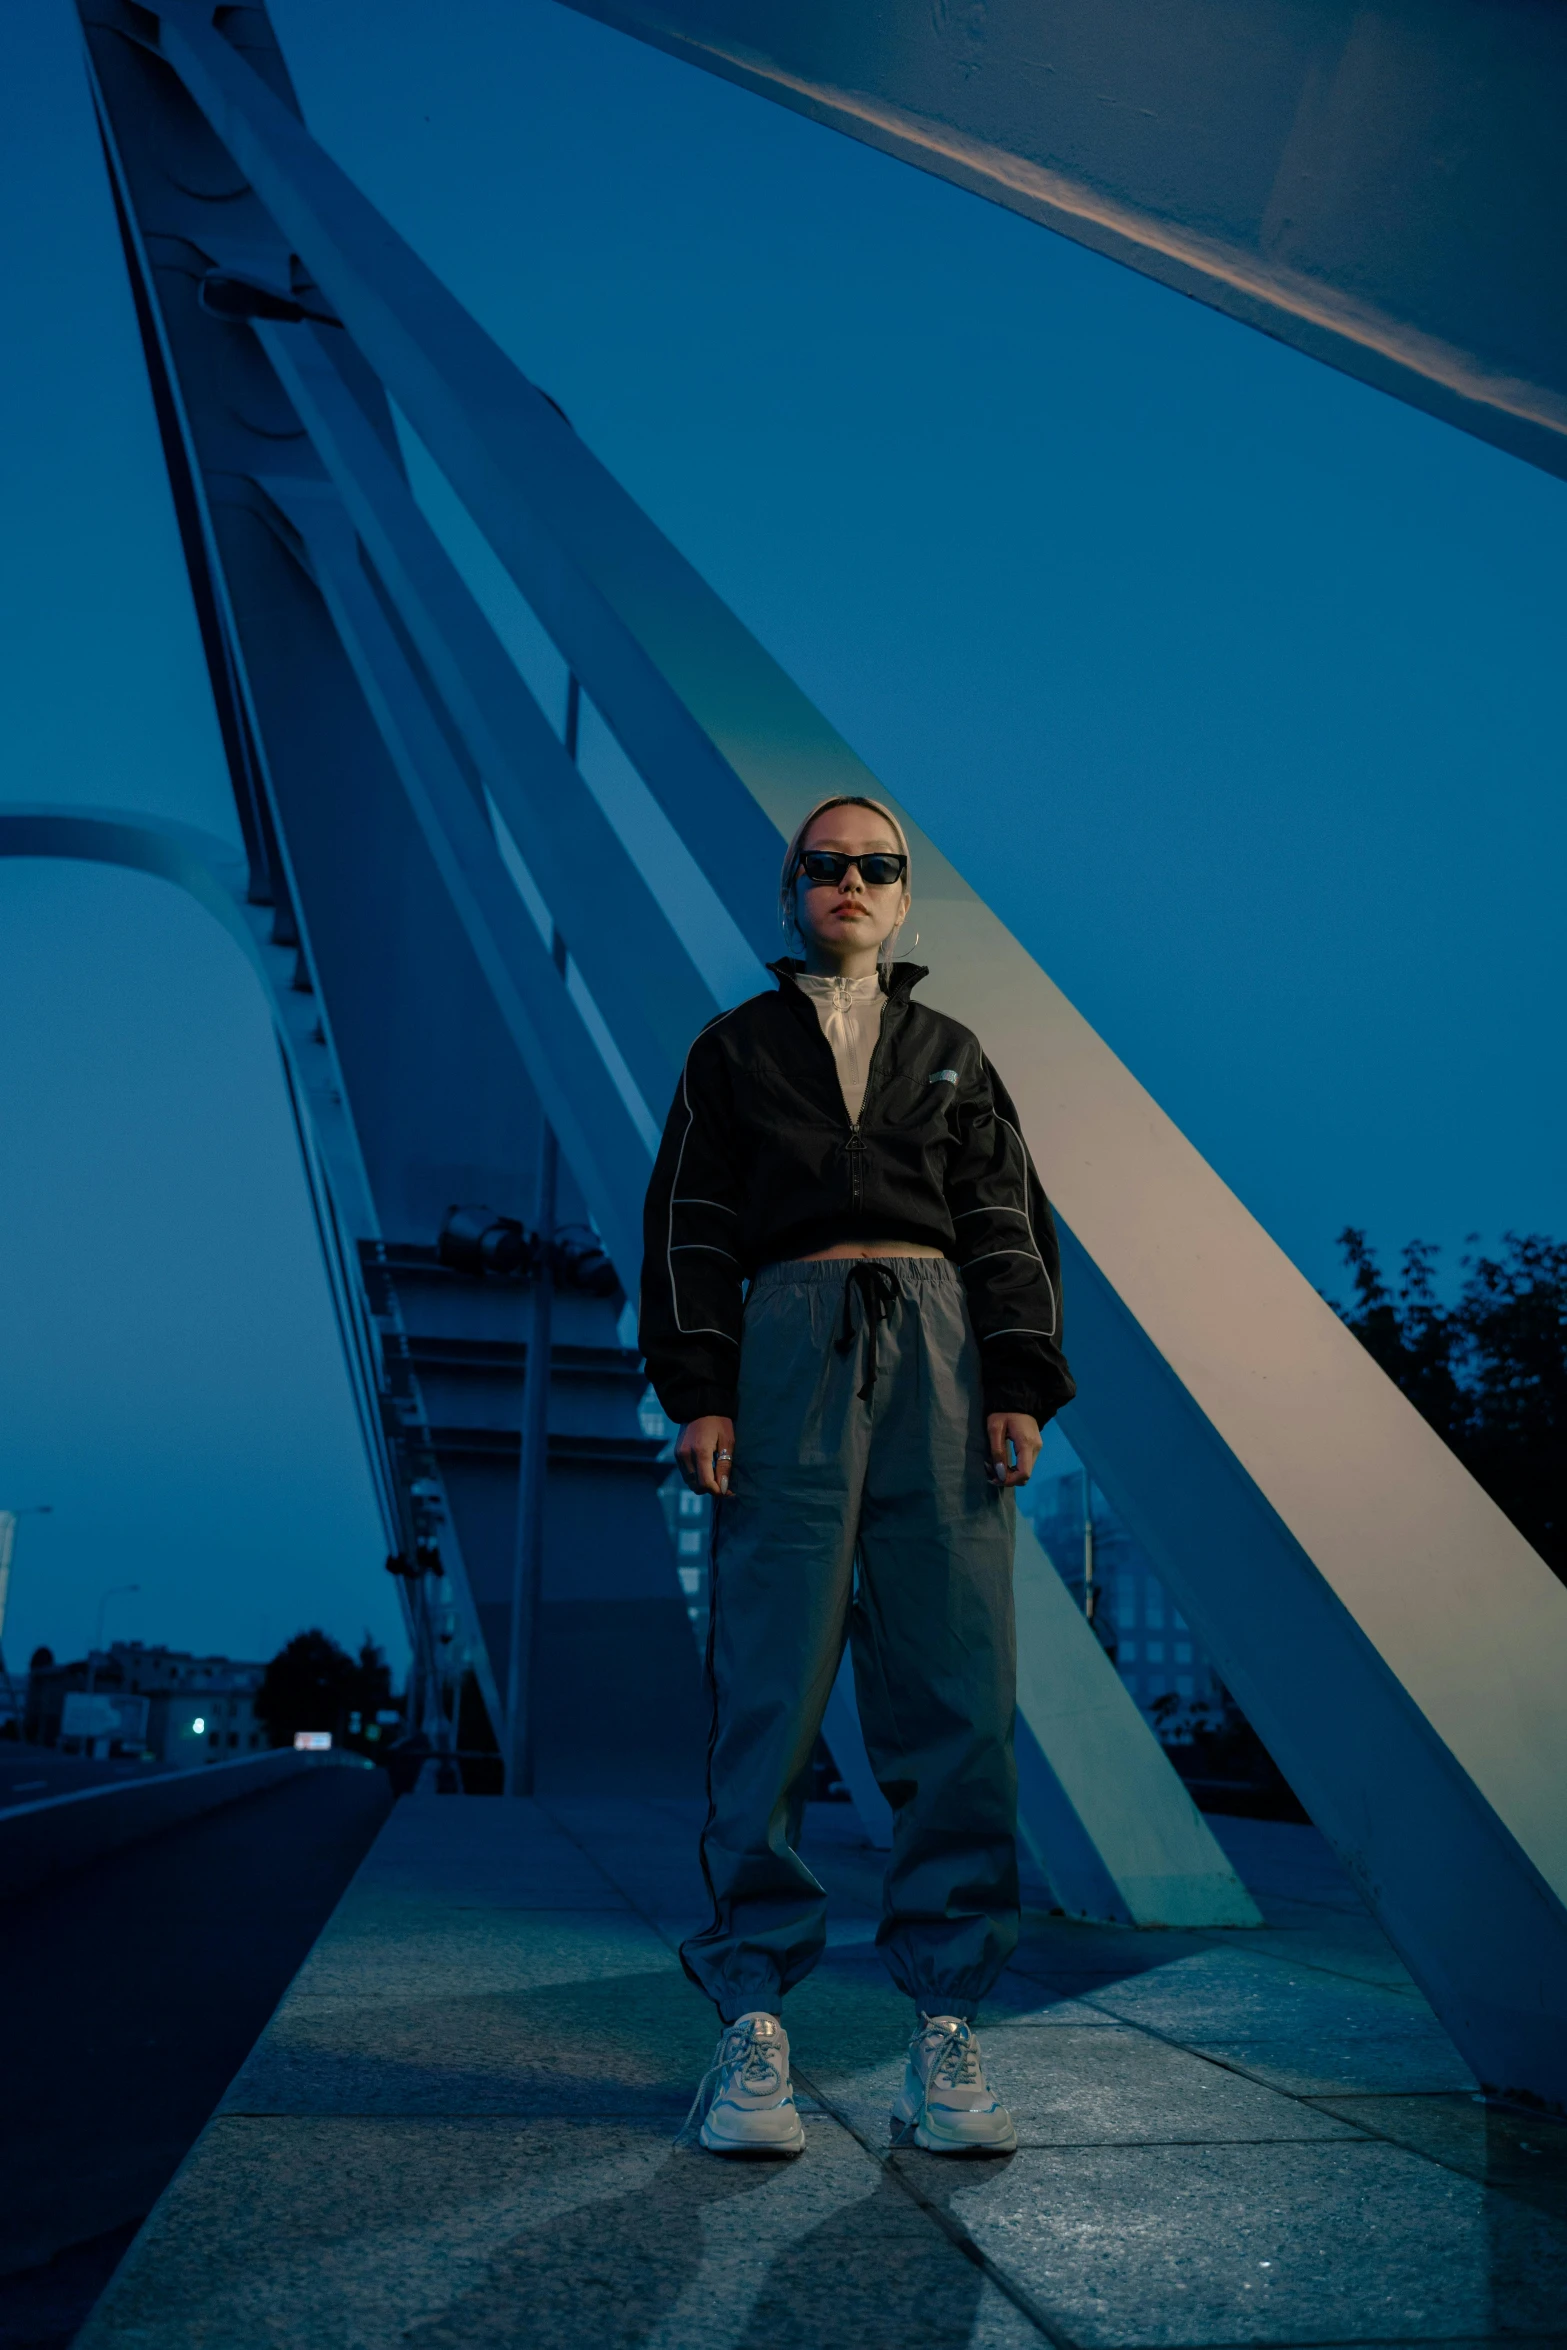 a man standing in front of a bridge at night, an album cover, neo-dada, bad bunny, high quality photo, a portrait of issey miyake, blue sky